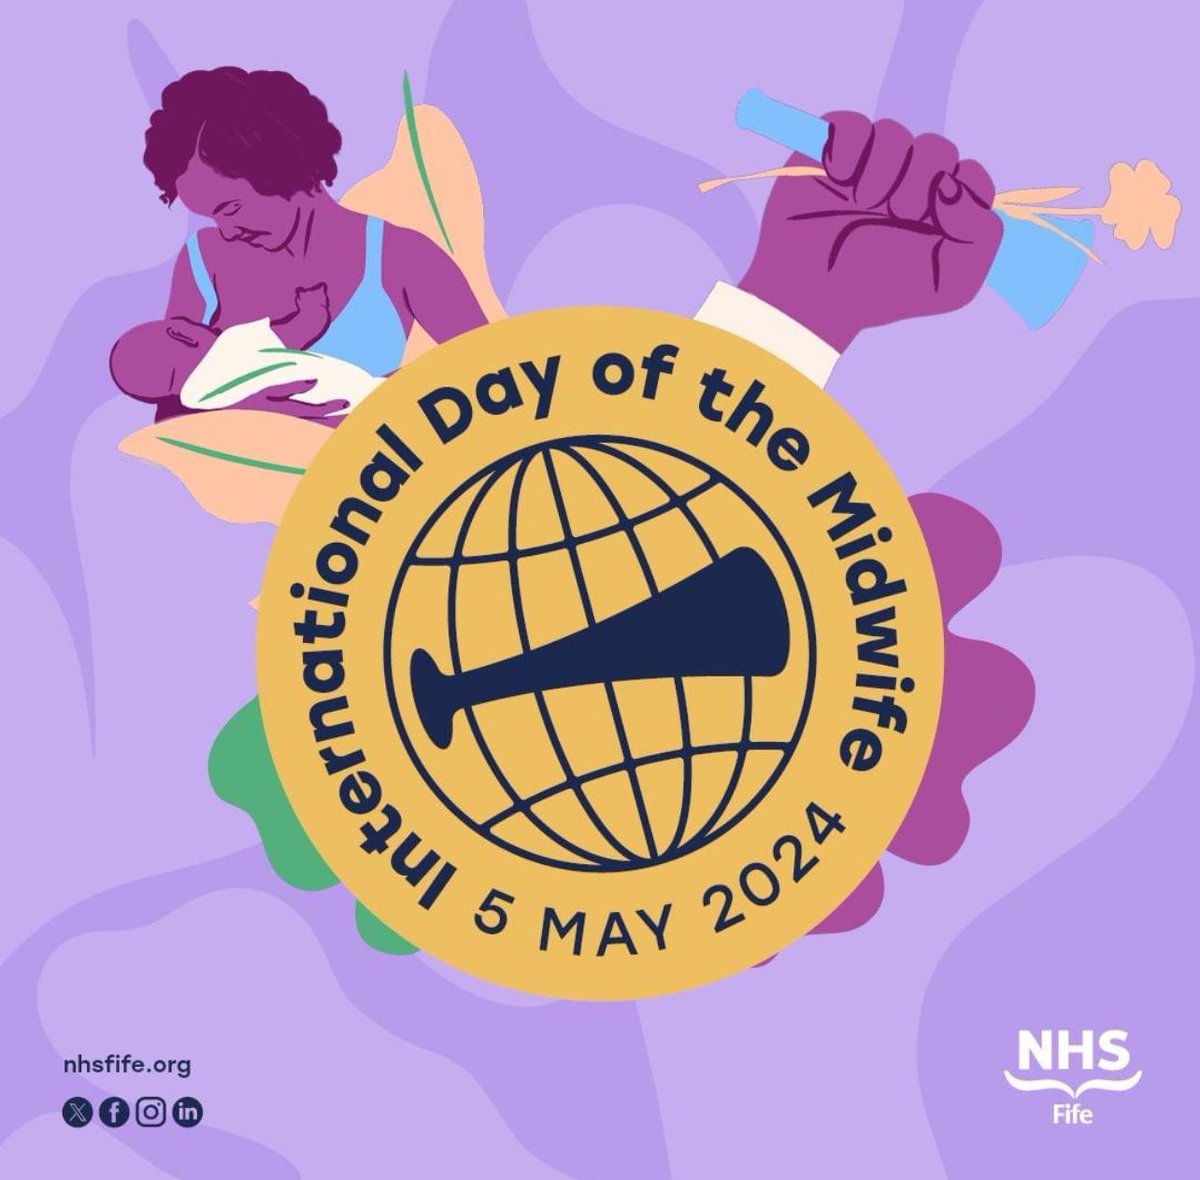 Happy International Day of the Midwife, thank you for all that you do 😊